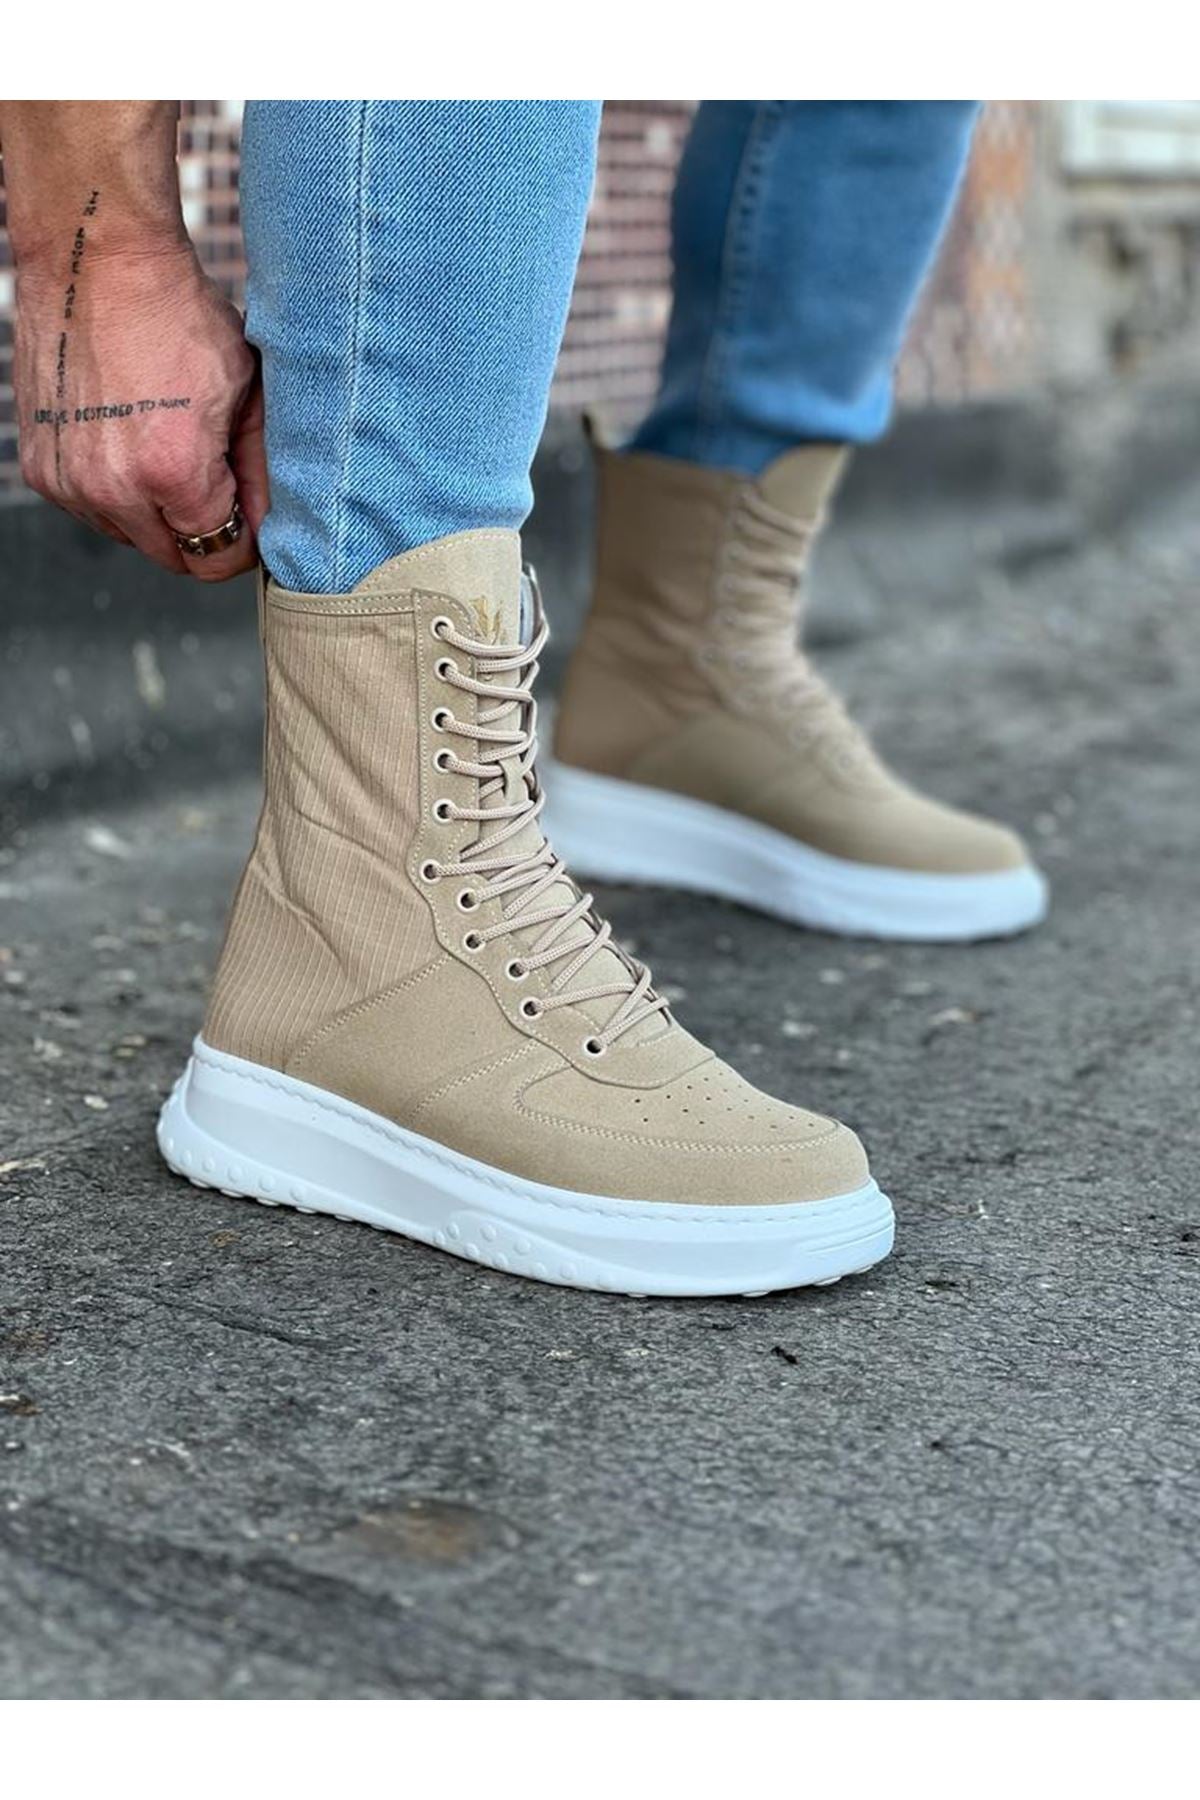 WG012 Men's Beige Suede Leather Long Lace-Up Boots - STREETMODE™